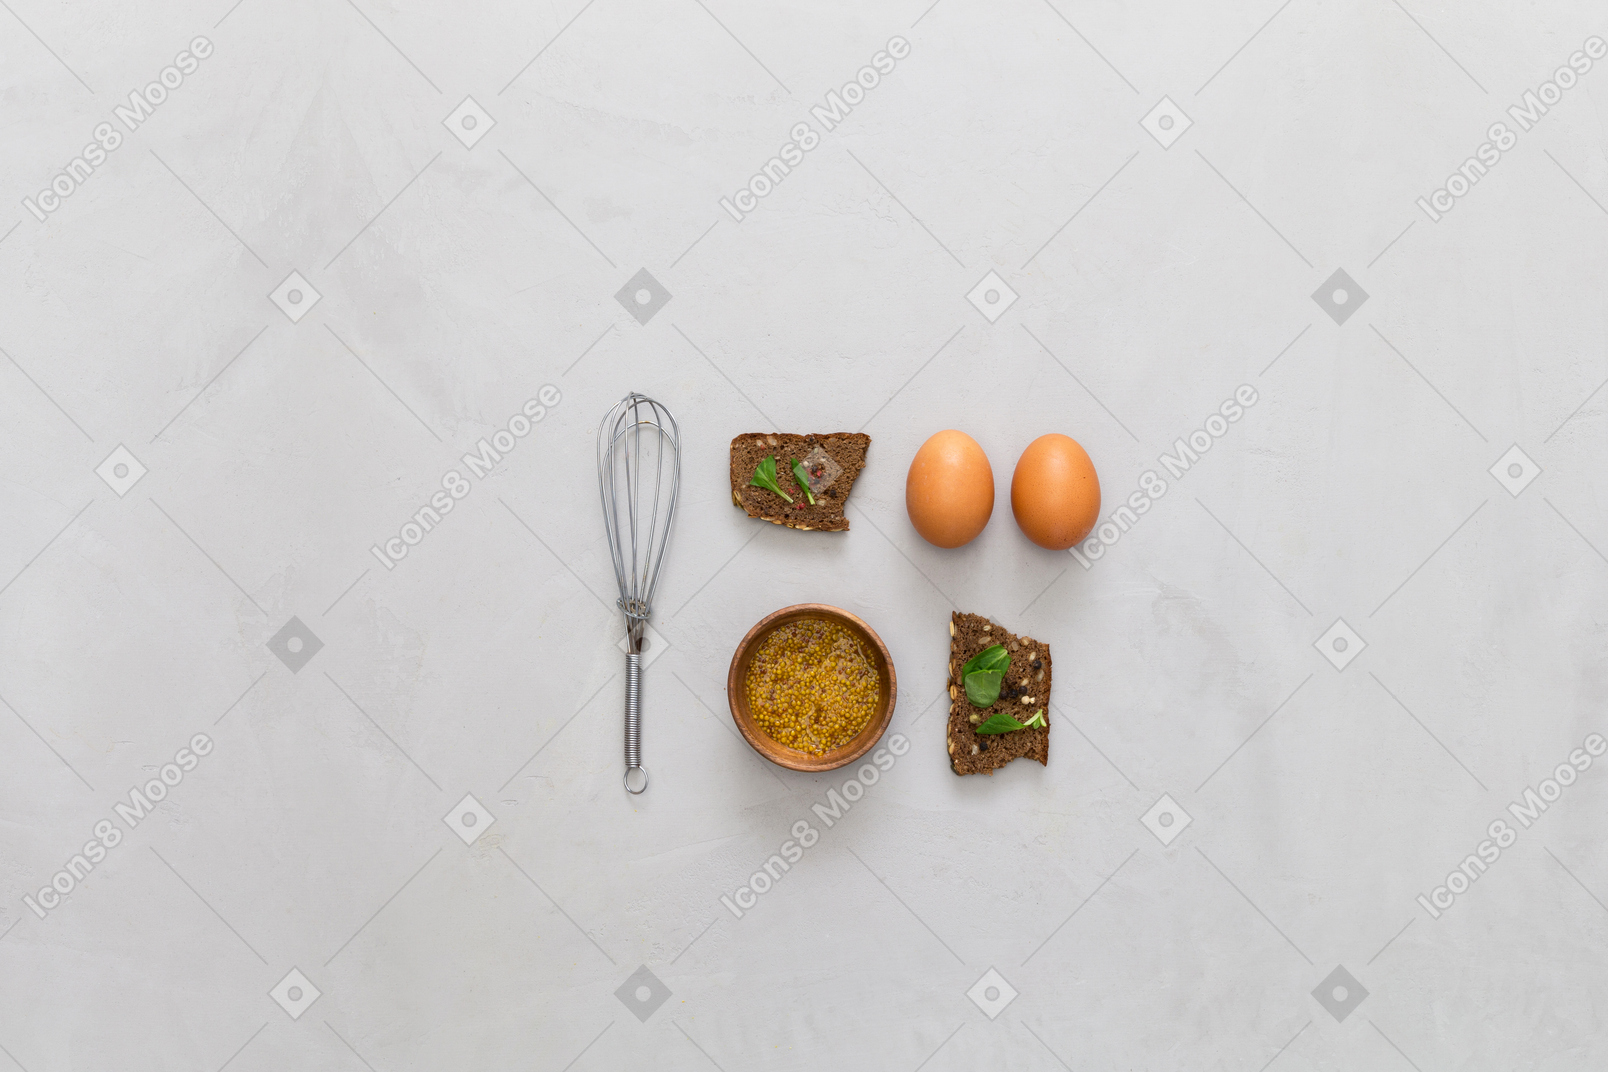 Egg and snack are perfect for breakfast